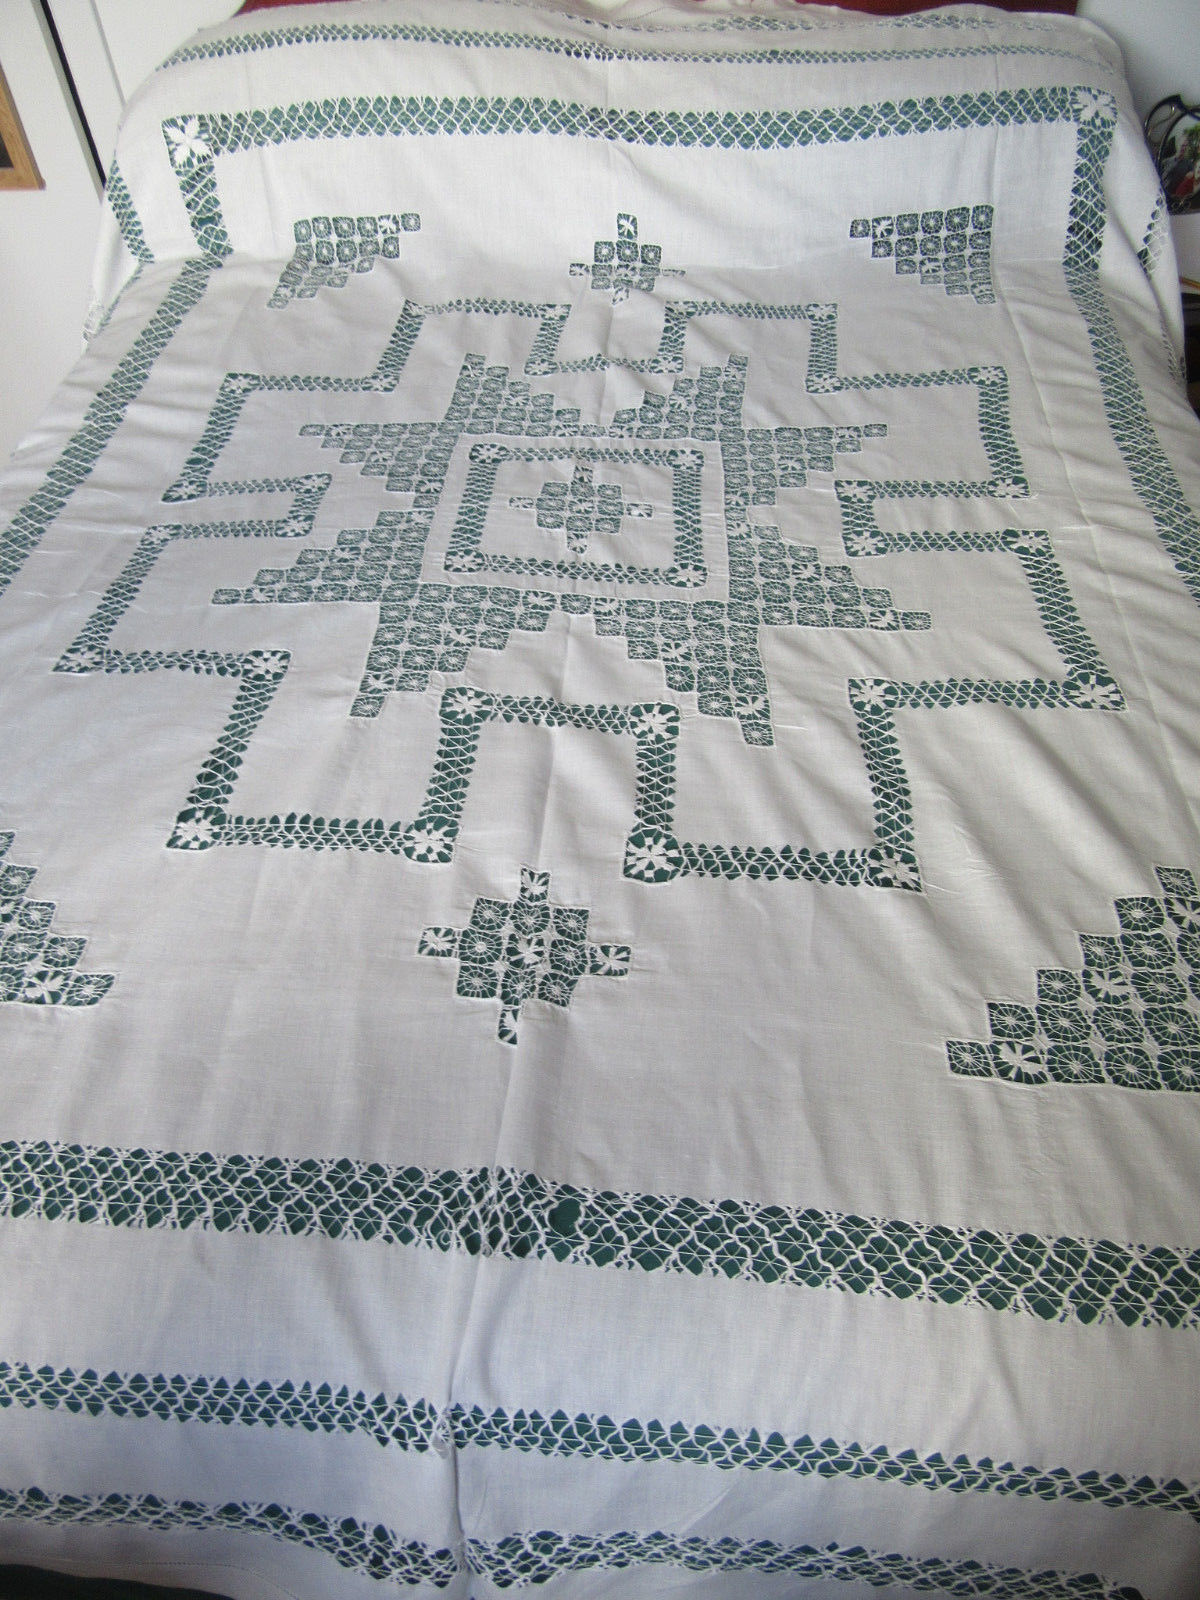 Antique white linen double bed size bedspread drawnthread embroidery 200 x 240 c